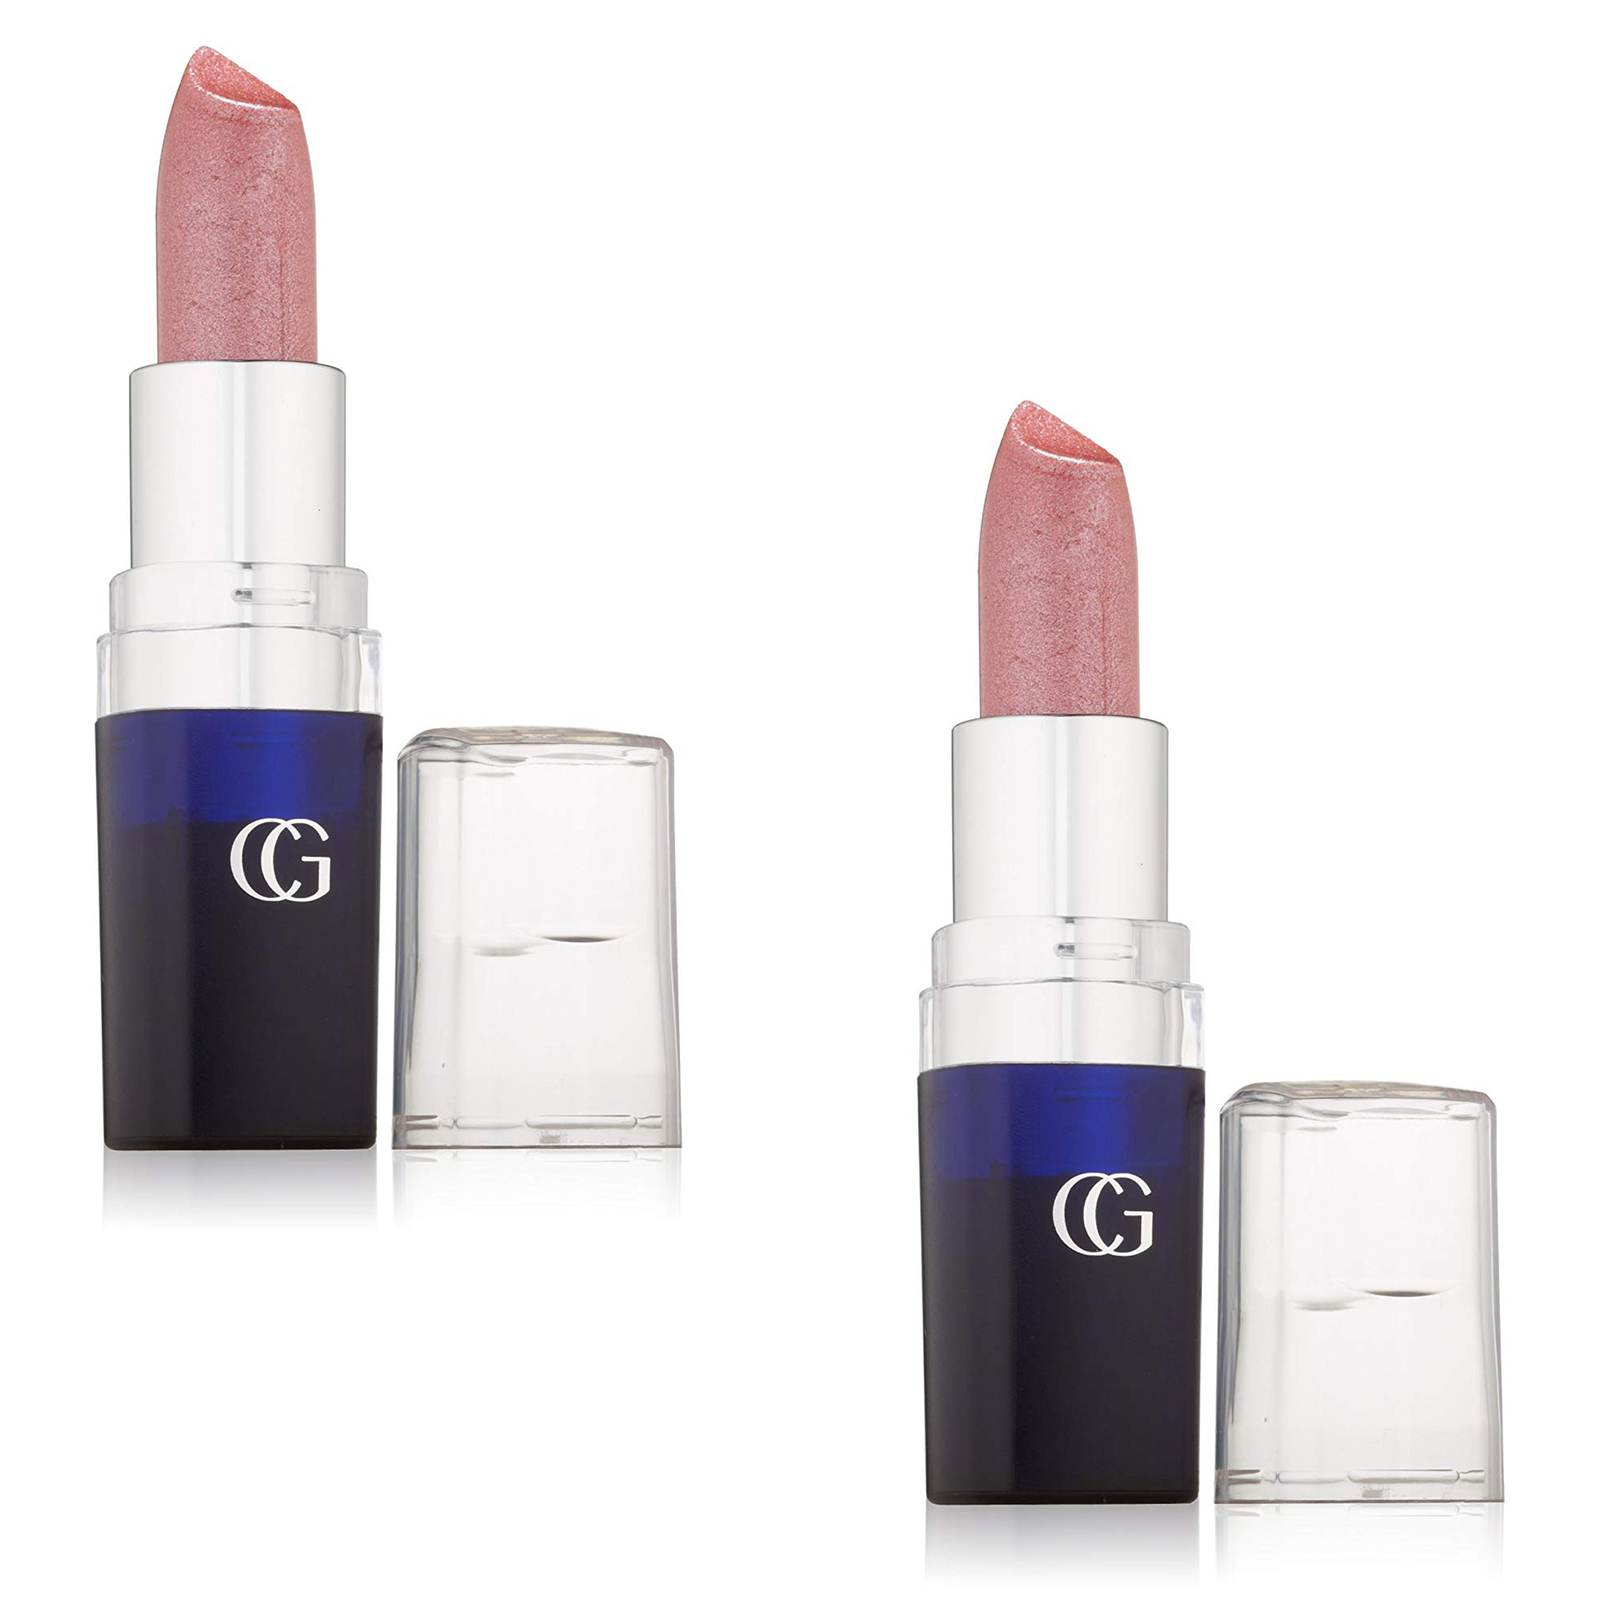 Primary image for (2 Pack) CoverGirl Continuous Color Lipstick, Iced Mauve 420, 0.13-Ounce Bottles